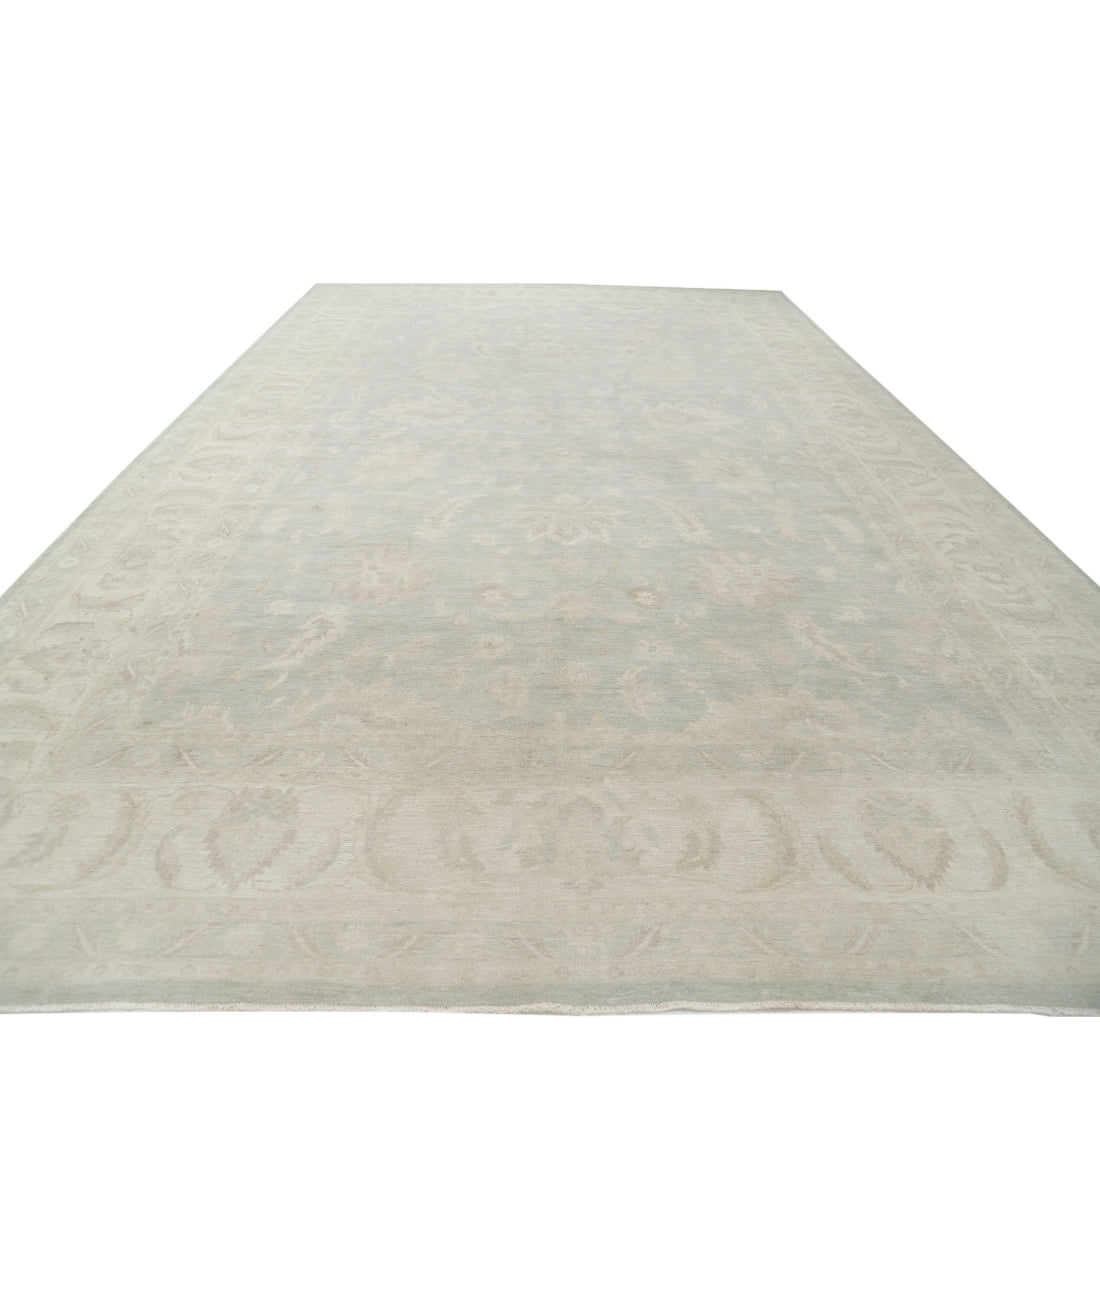 Hand Knotted Serenity Wool Rug - 13'2'' x 20'6'' 13'2'' x 20'6'' (395 X 615) / Green / Ivory